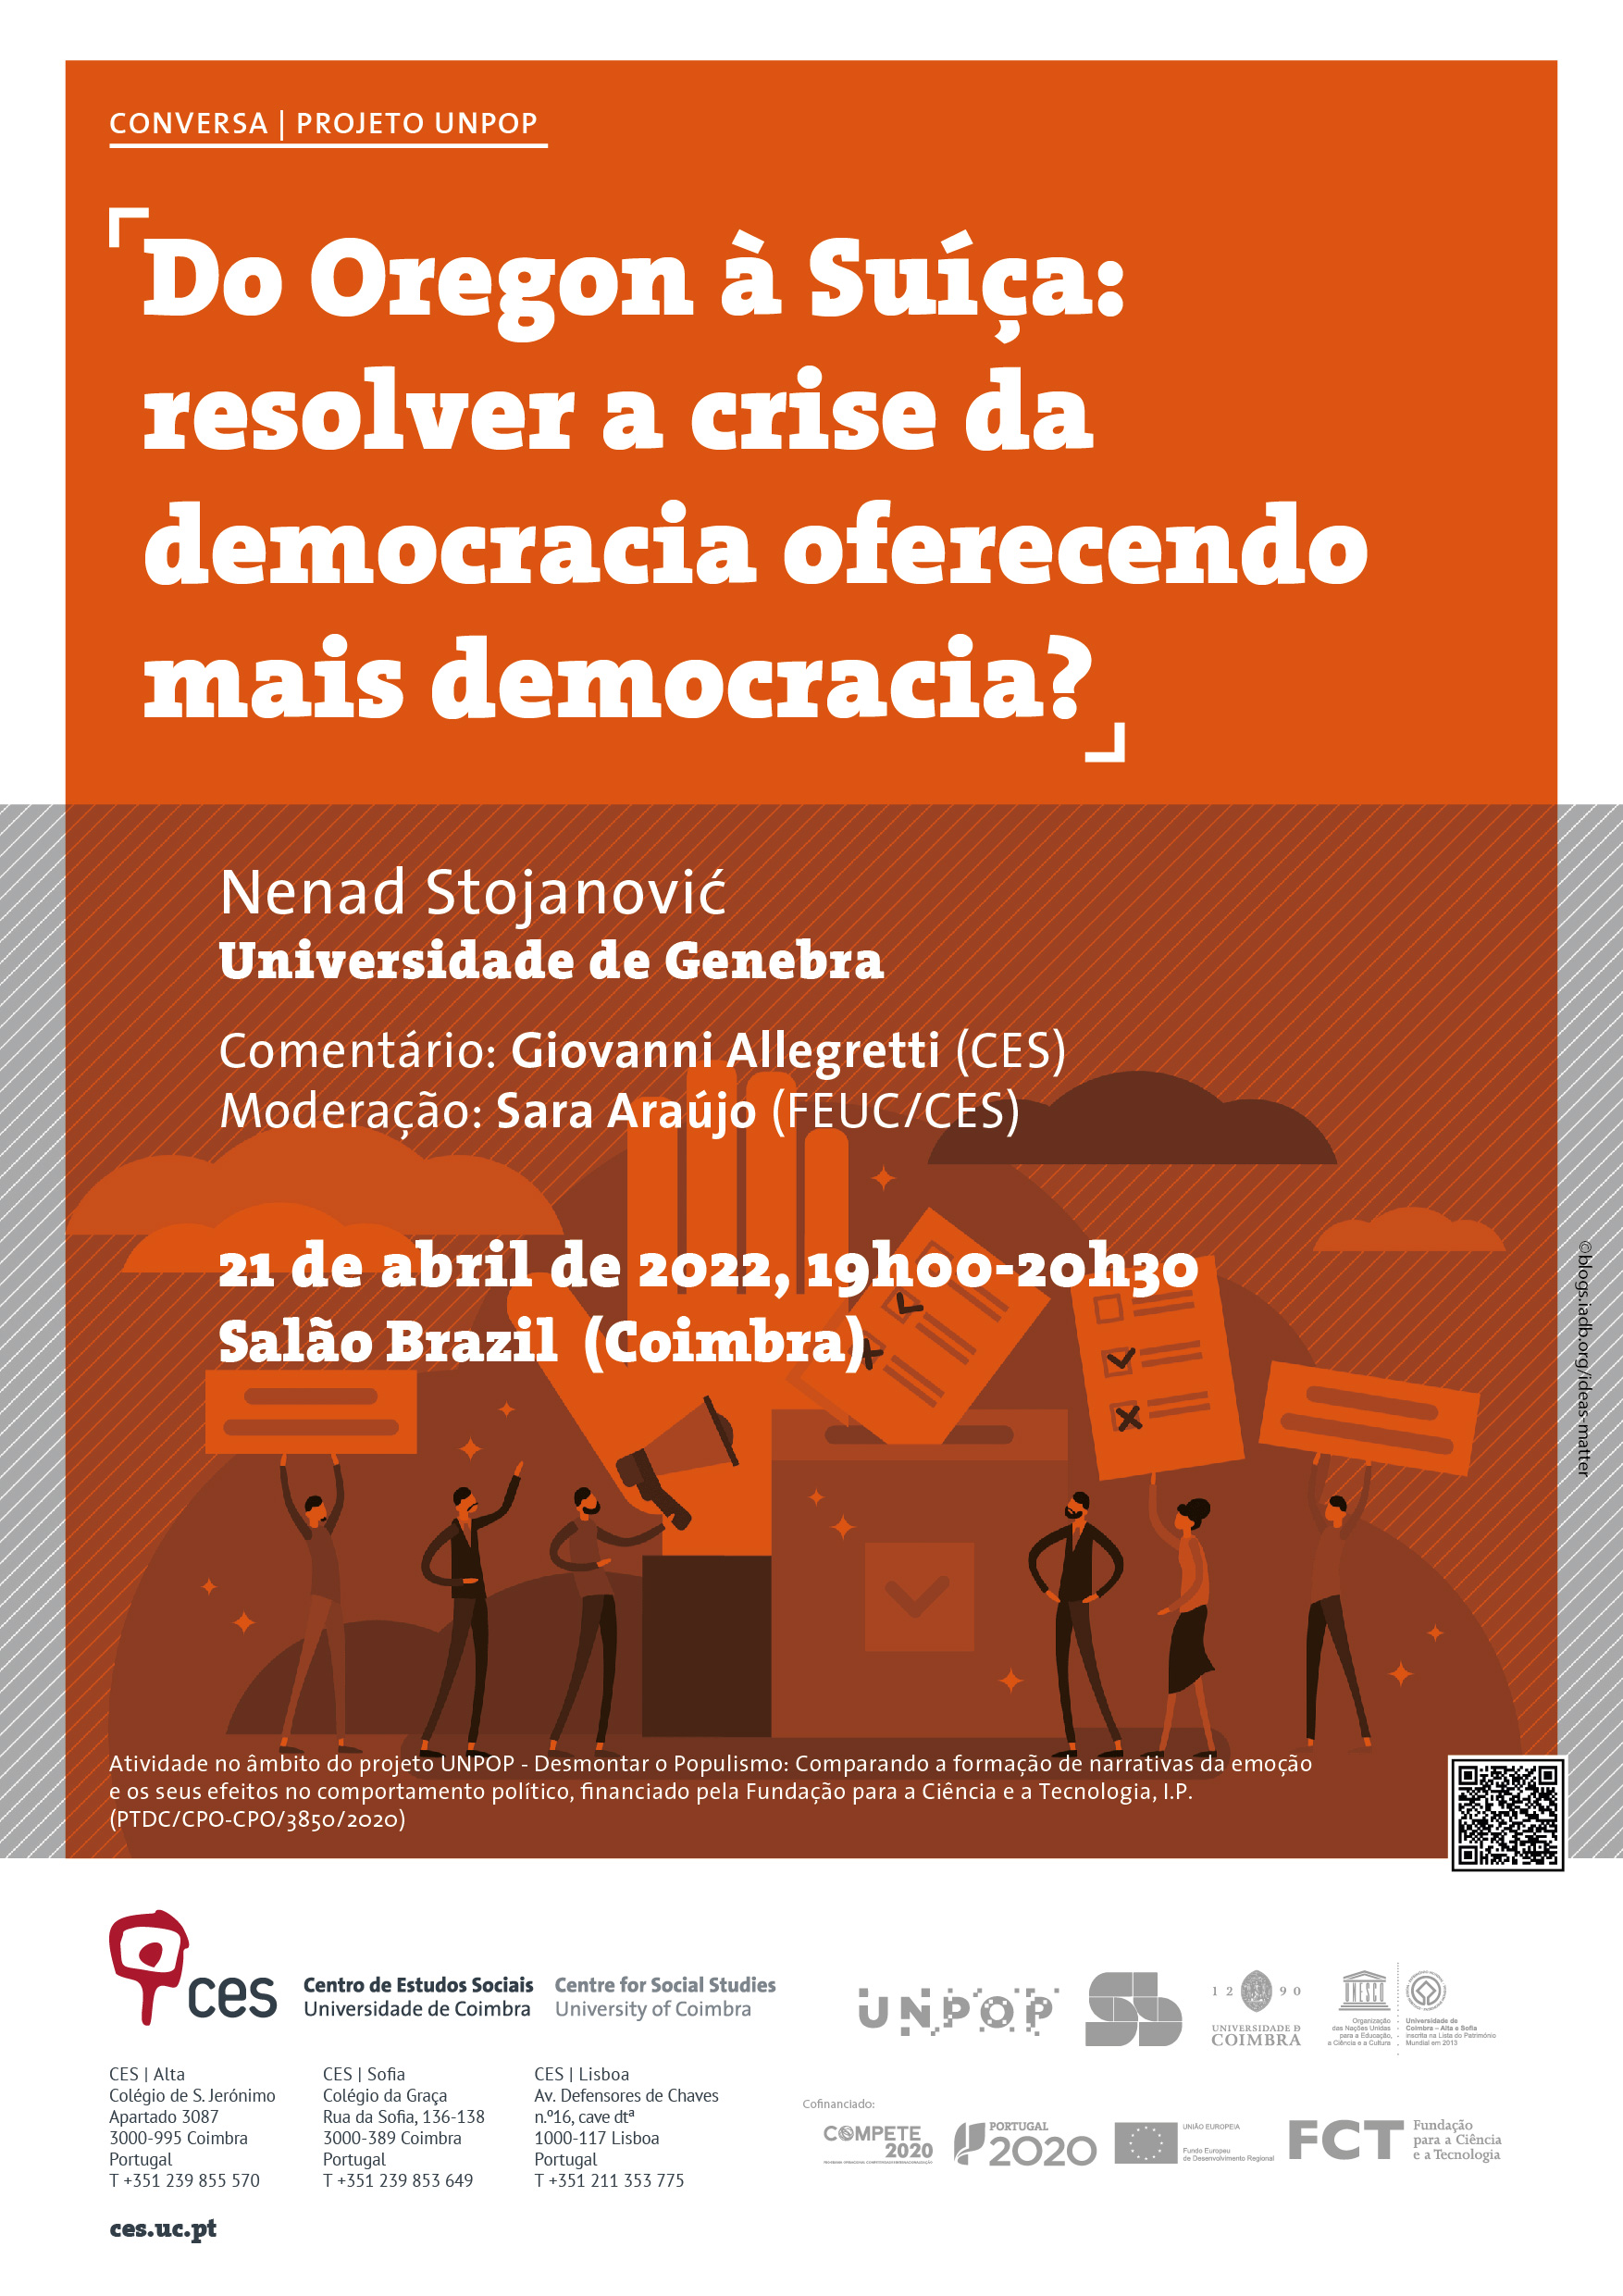 From Oregon to Switzerland: solving the crisis of democracy by offering more democracy?<span id="edit_37790"><script>$(function() { $('#edit_37790').load( "/myces/user/editobj.php?tipo=evento&id=37790" ); });</script></span>